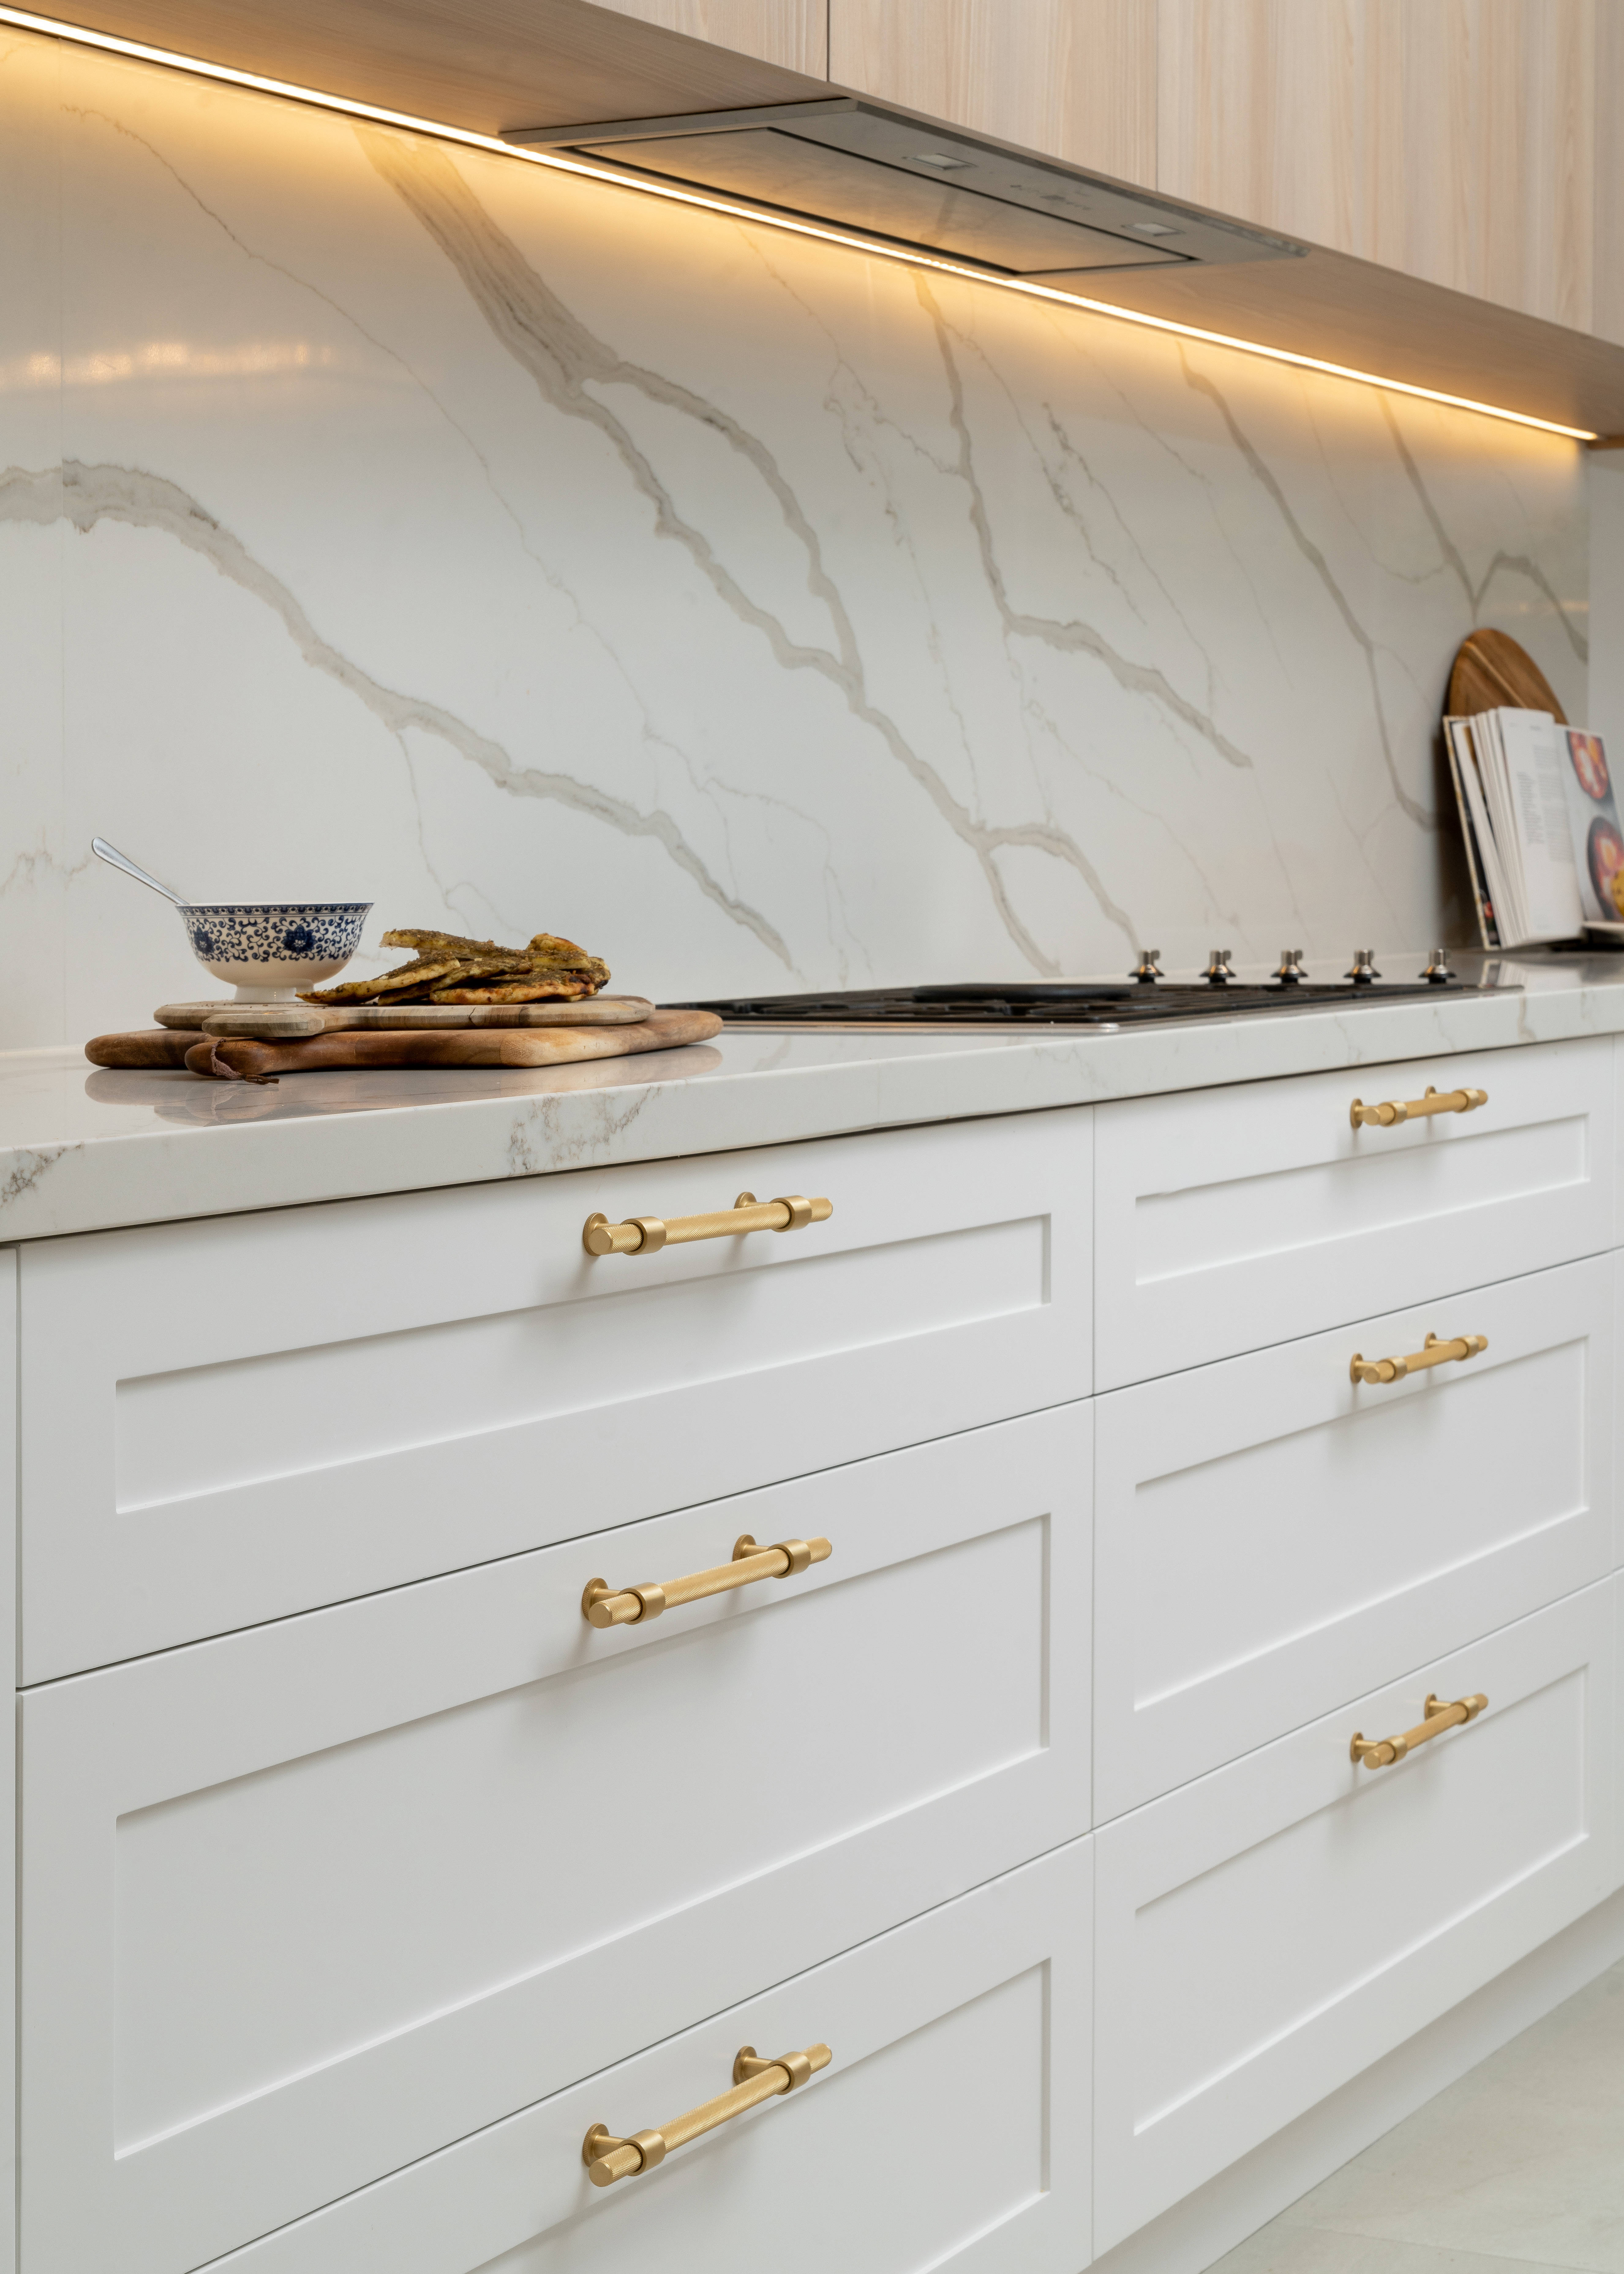 5 Cabinet Handle Trends We Expect to See in 2023, Archant